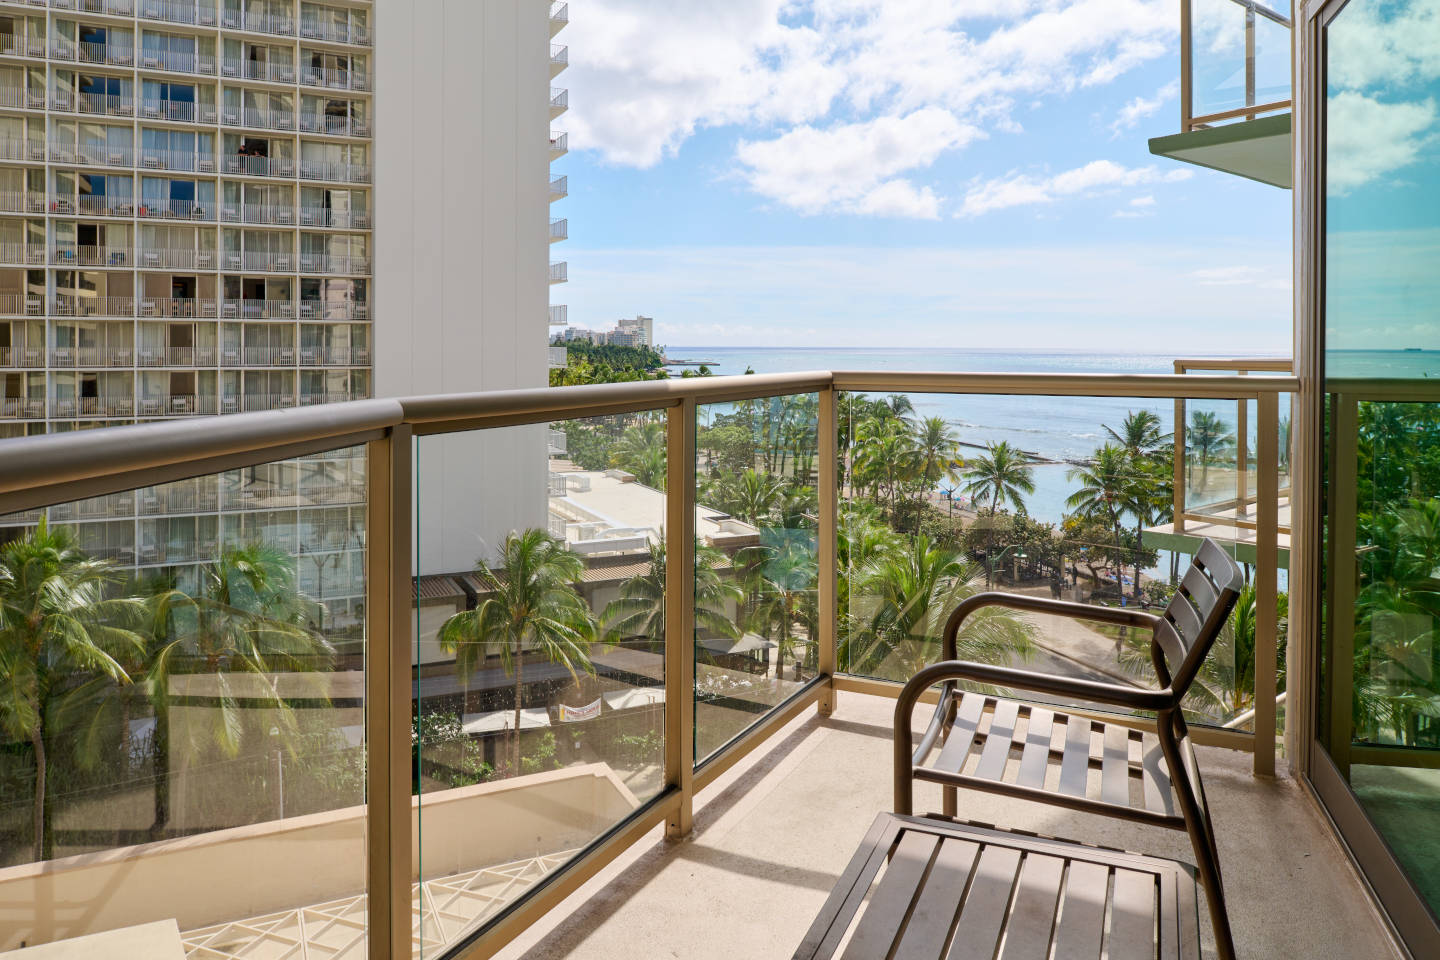 Partial Ocean View Accessible Room Balcony with seating to enjoy the views of the ocean